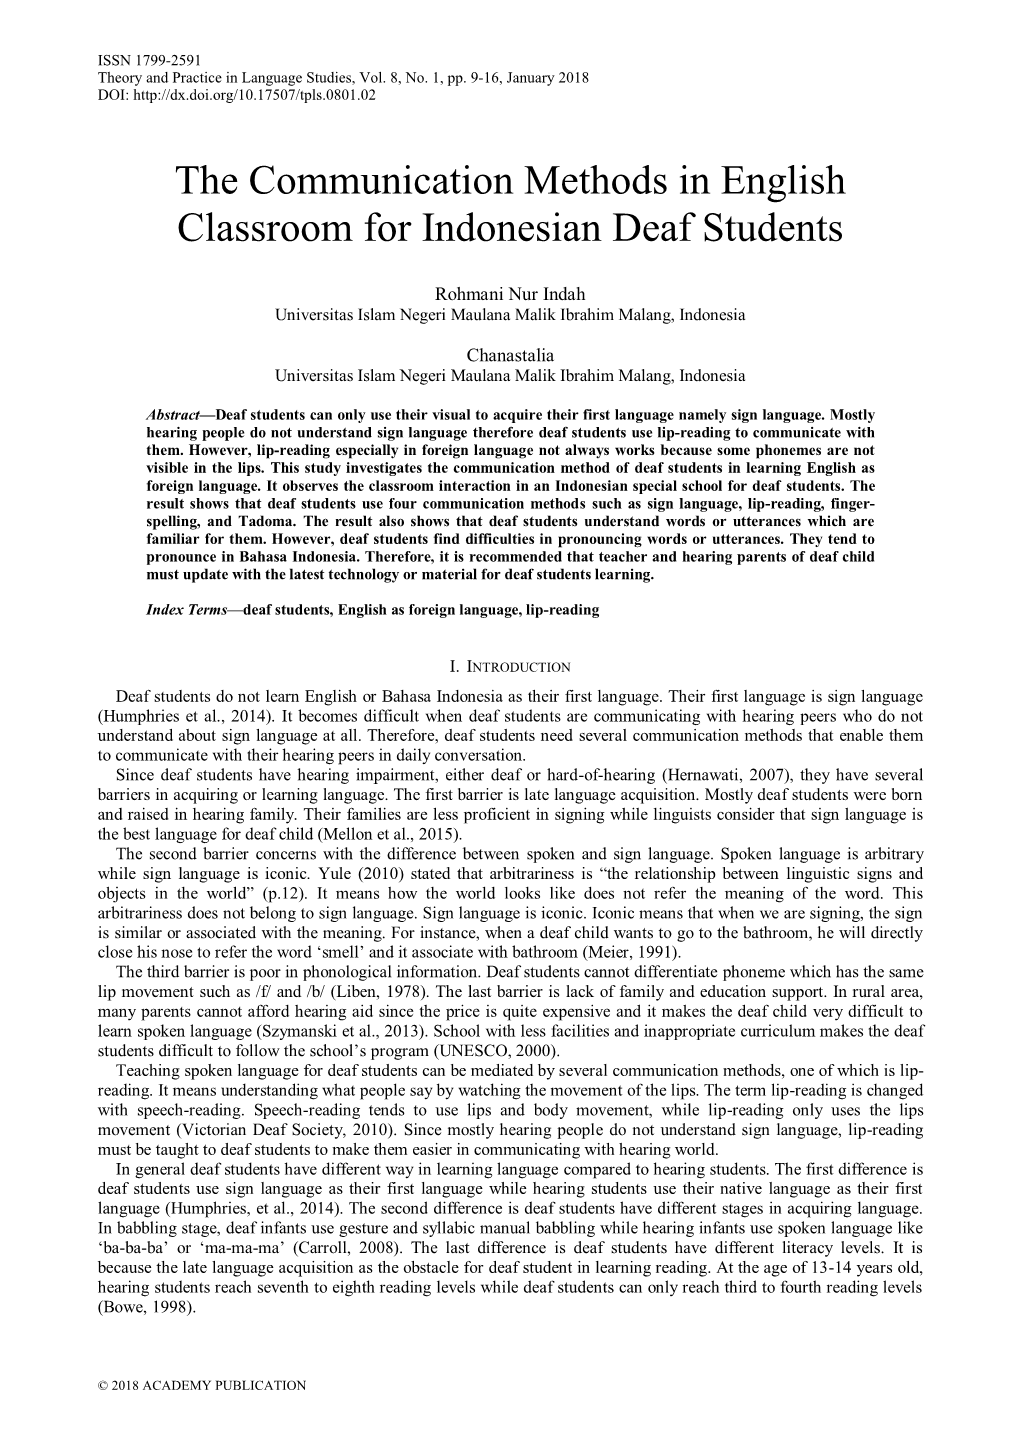 The Communication Methods in English Classroom for Indonesian Deaf Students